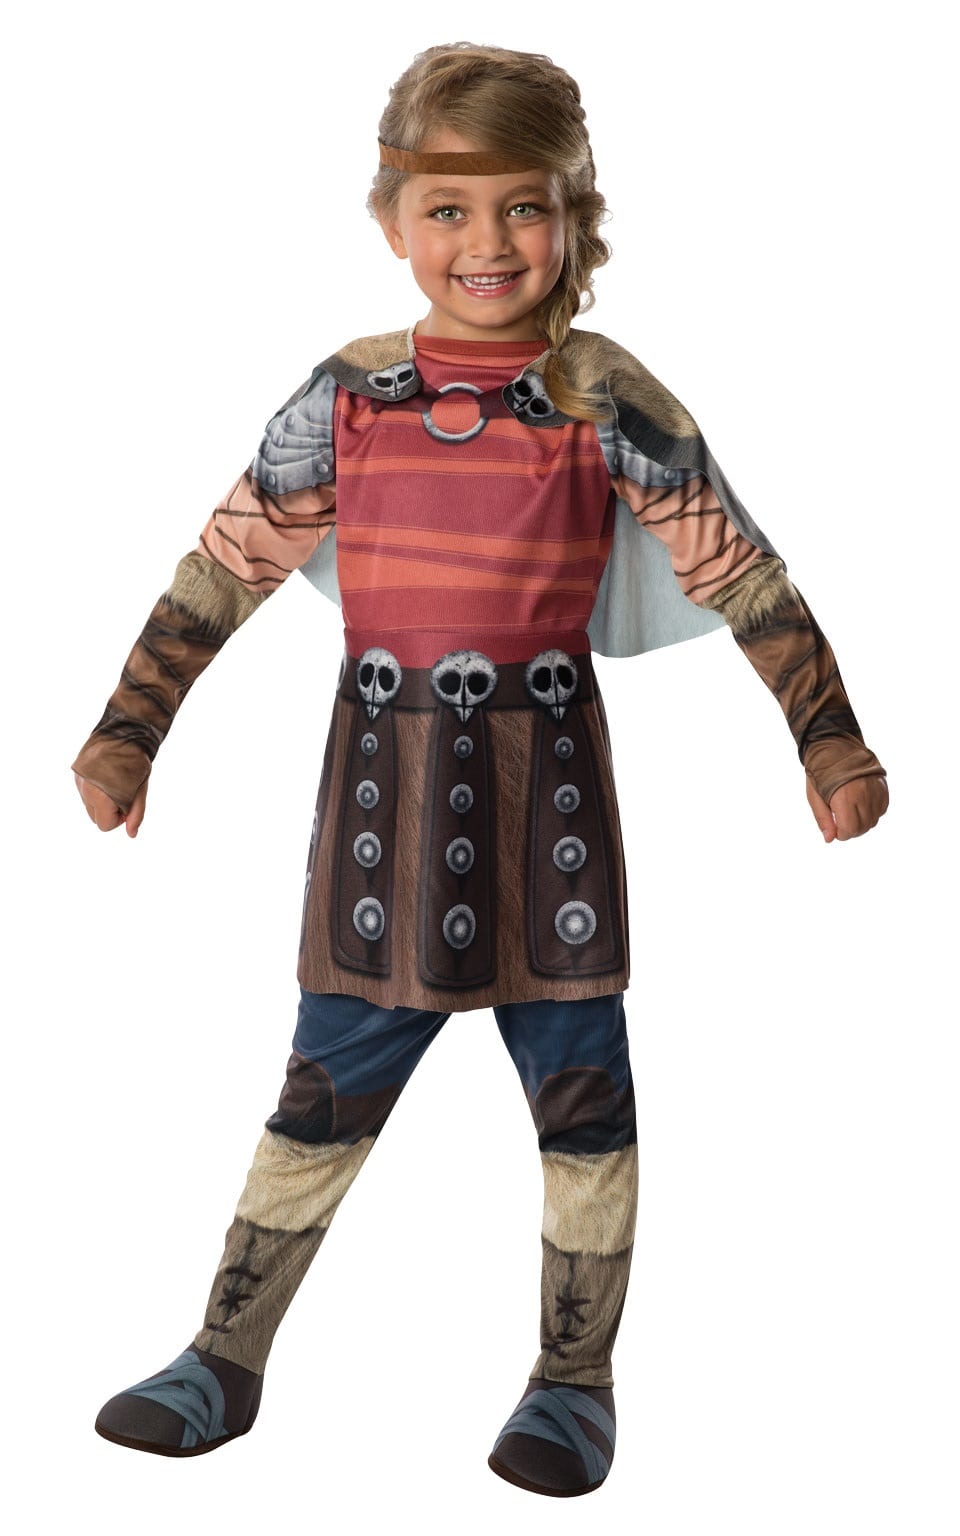 How to Train Your Dragon 2 Astrid Children's Fancy Dress Costume